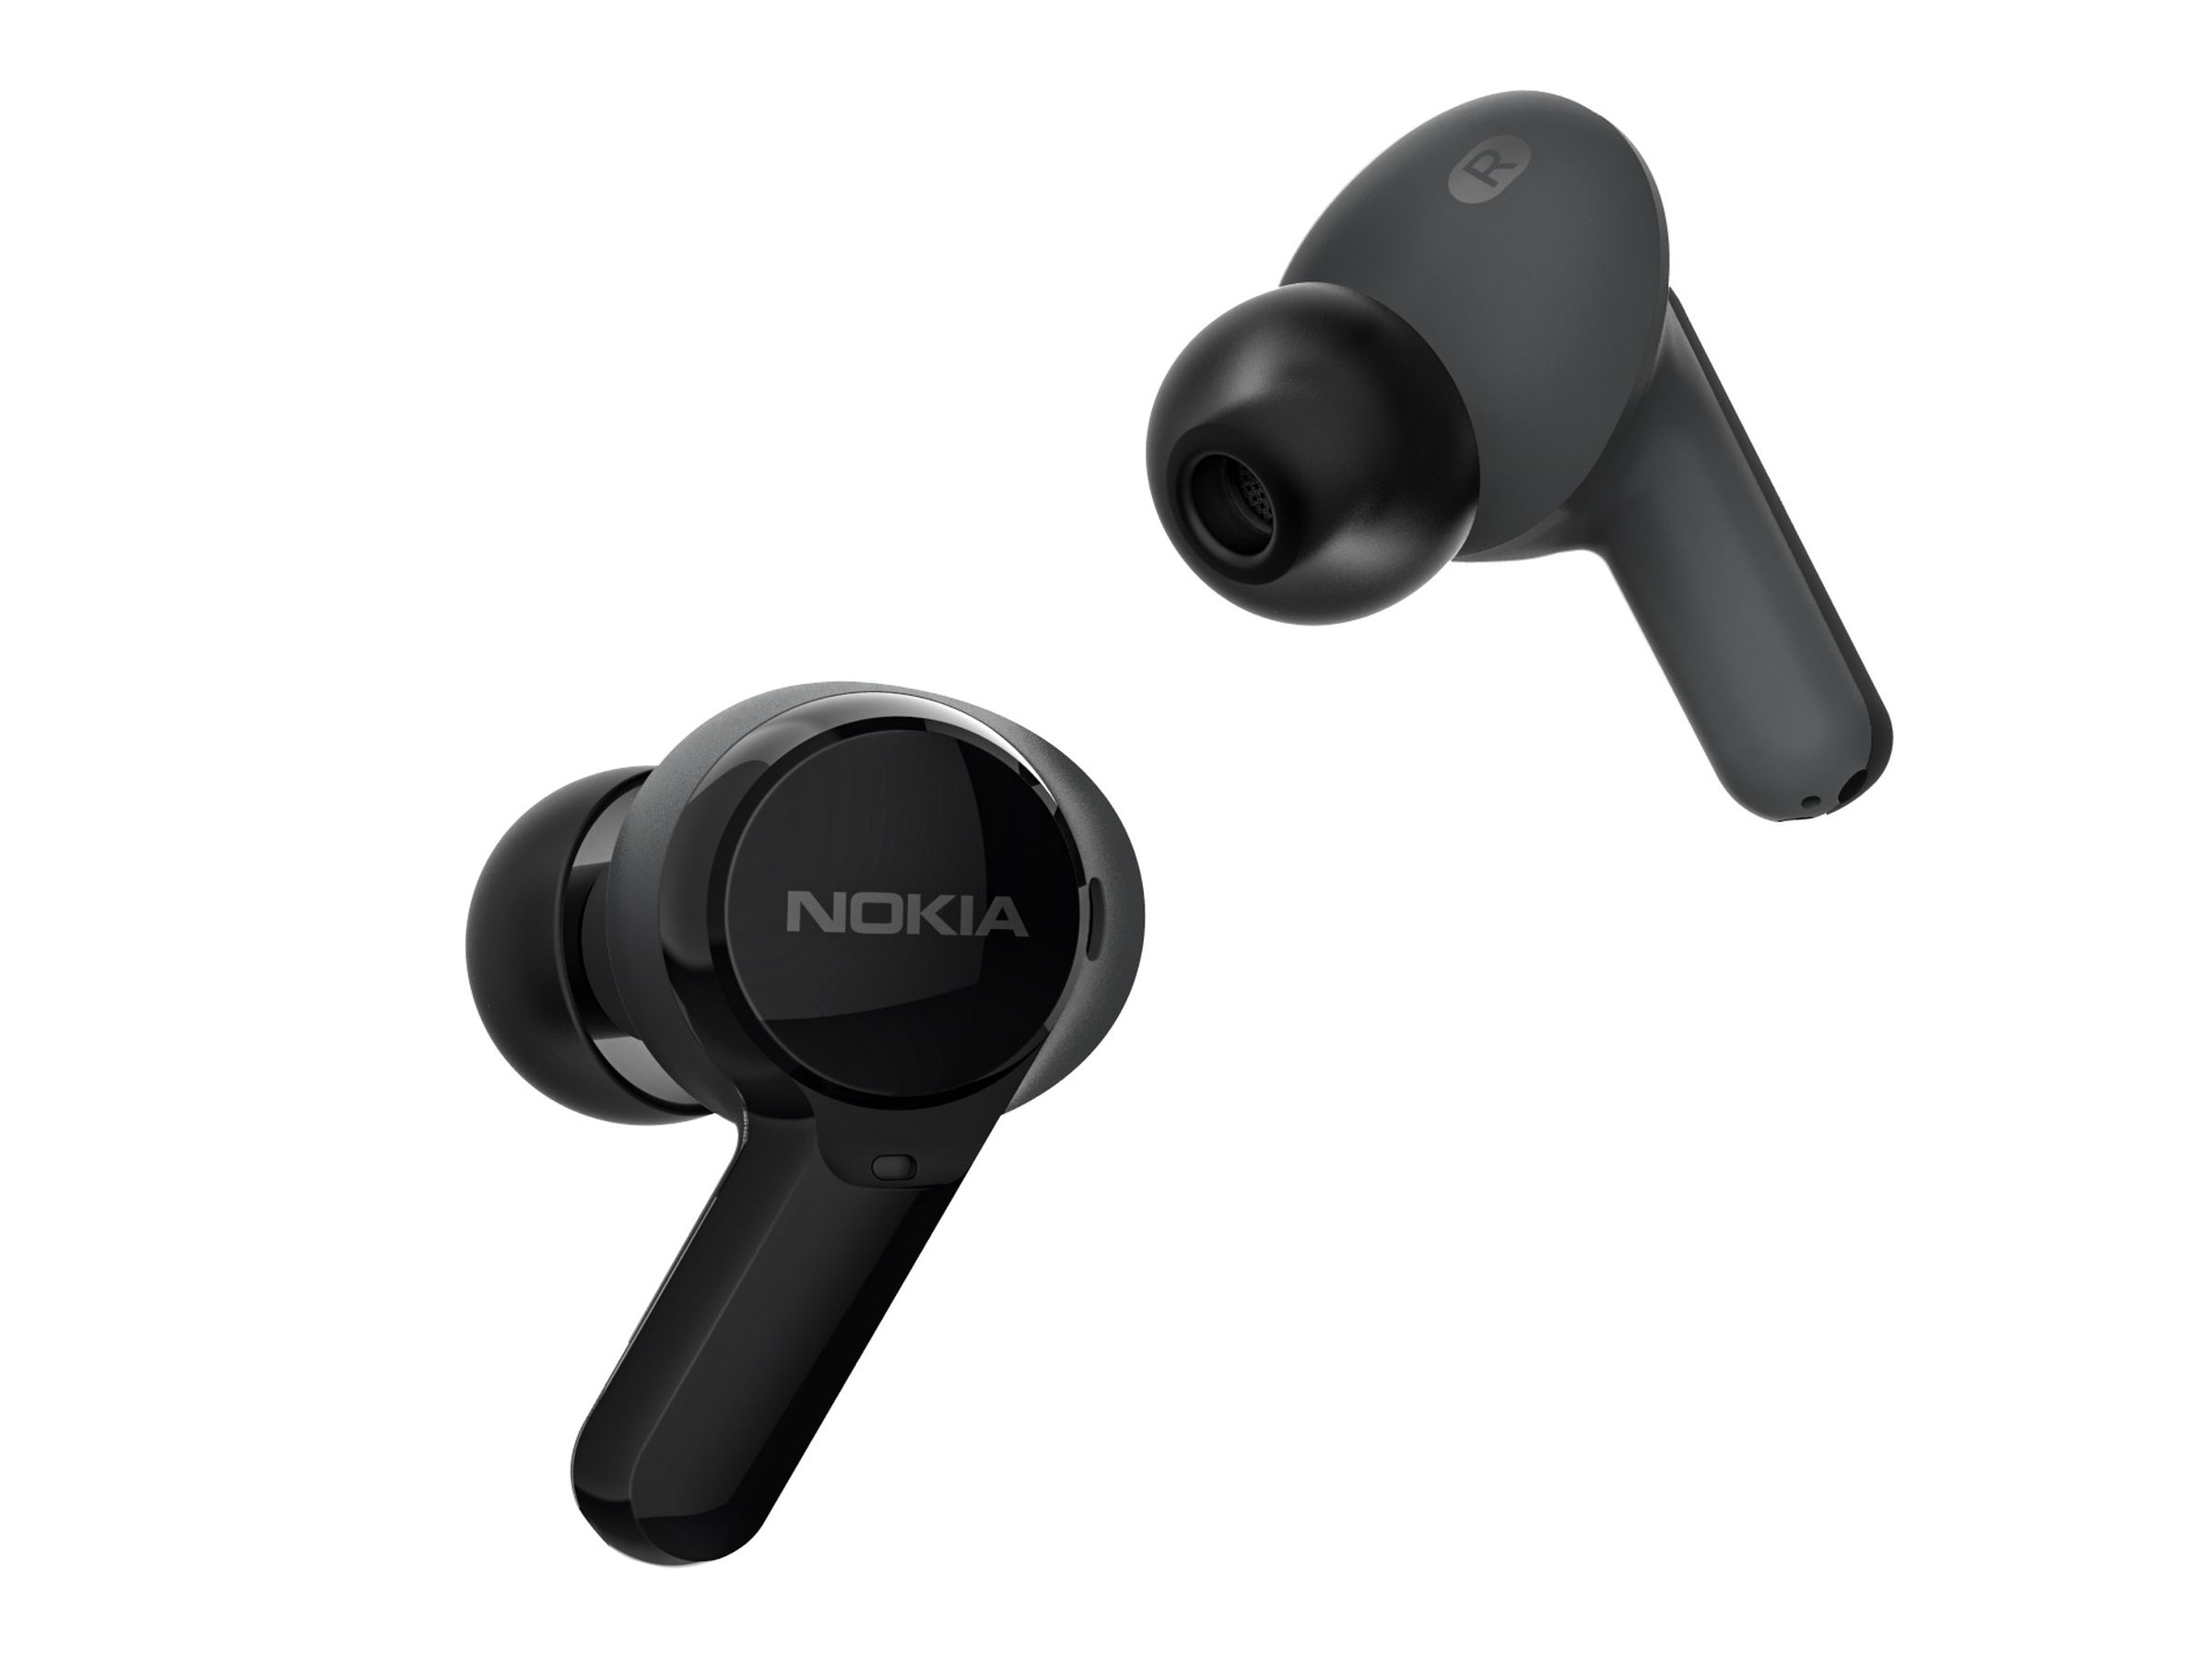 The Nokia Clarity Earbuds Pro include active noise cancellation.